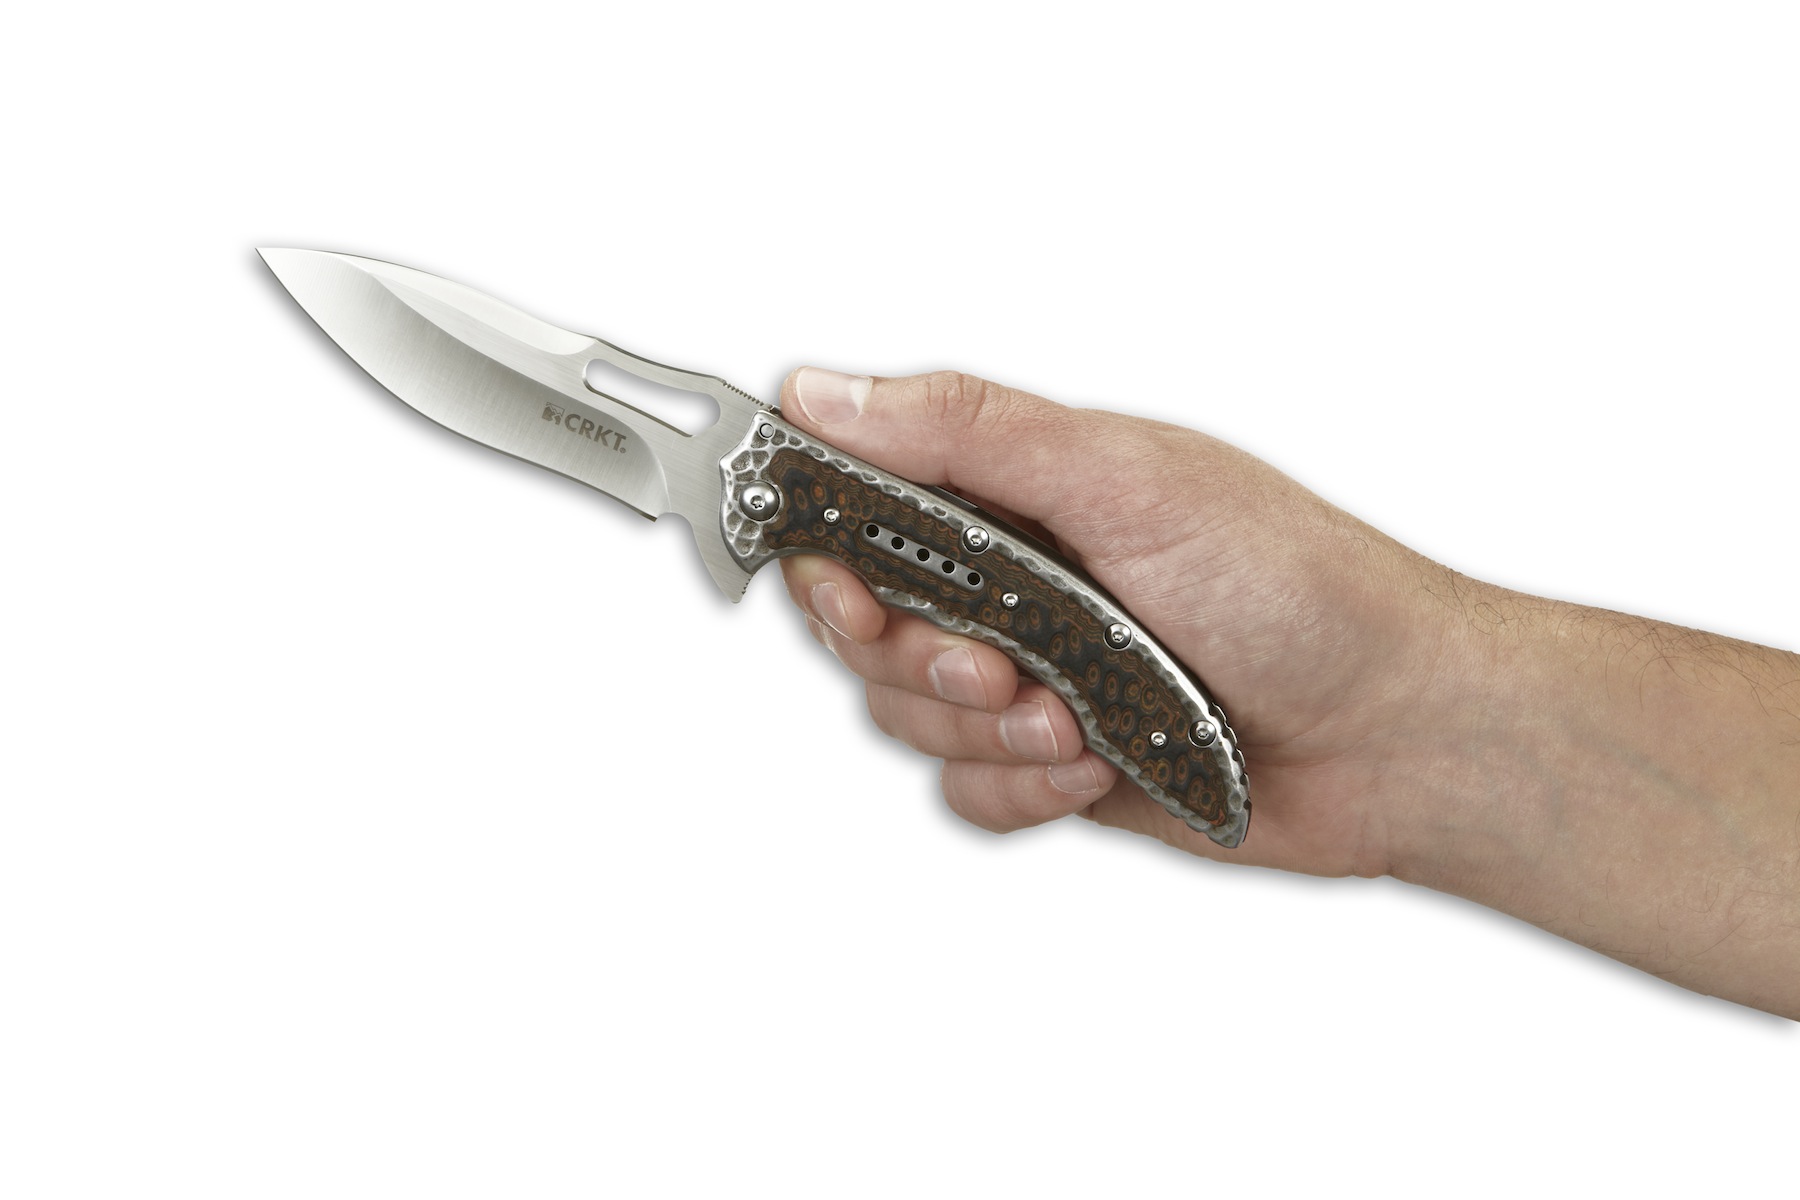 The knife handle should fit your hand snugly. The knife is the CRKT Fossil.